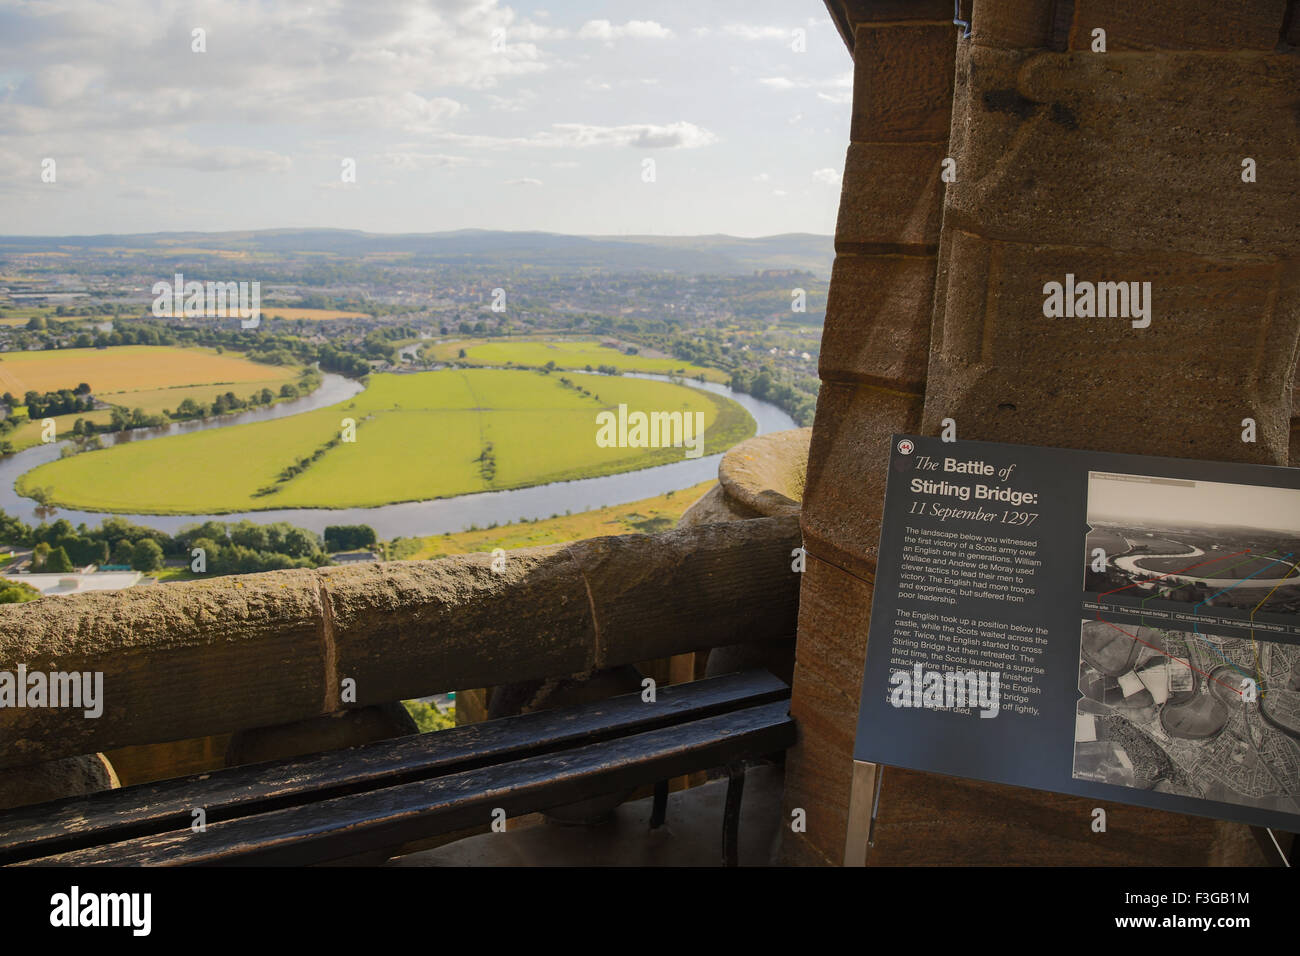 The battlefield of Stirling Bridge surrounded by The River Forth and Stirling viewed from The National Wallace Monument, Stirling in Scotland Stock Photo